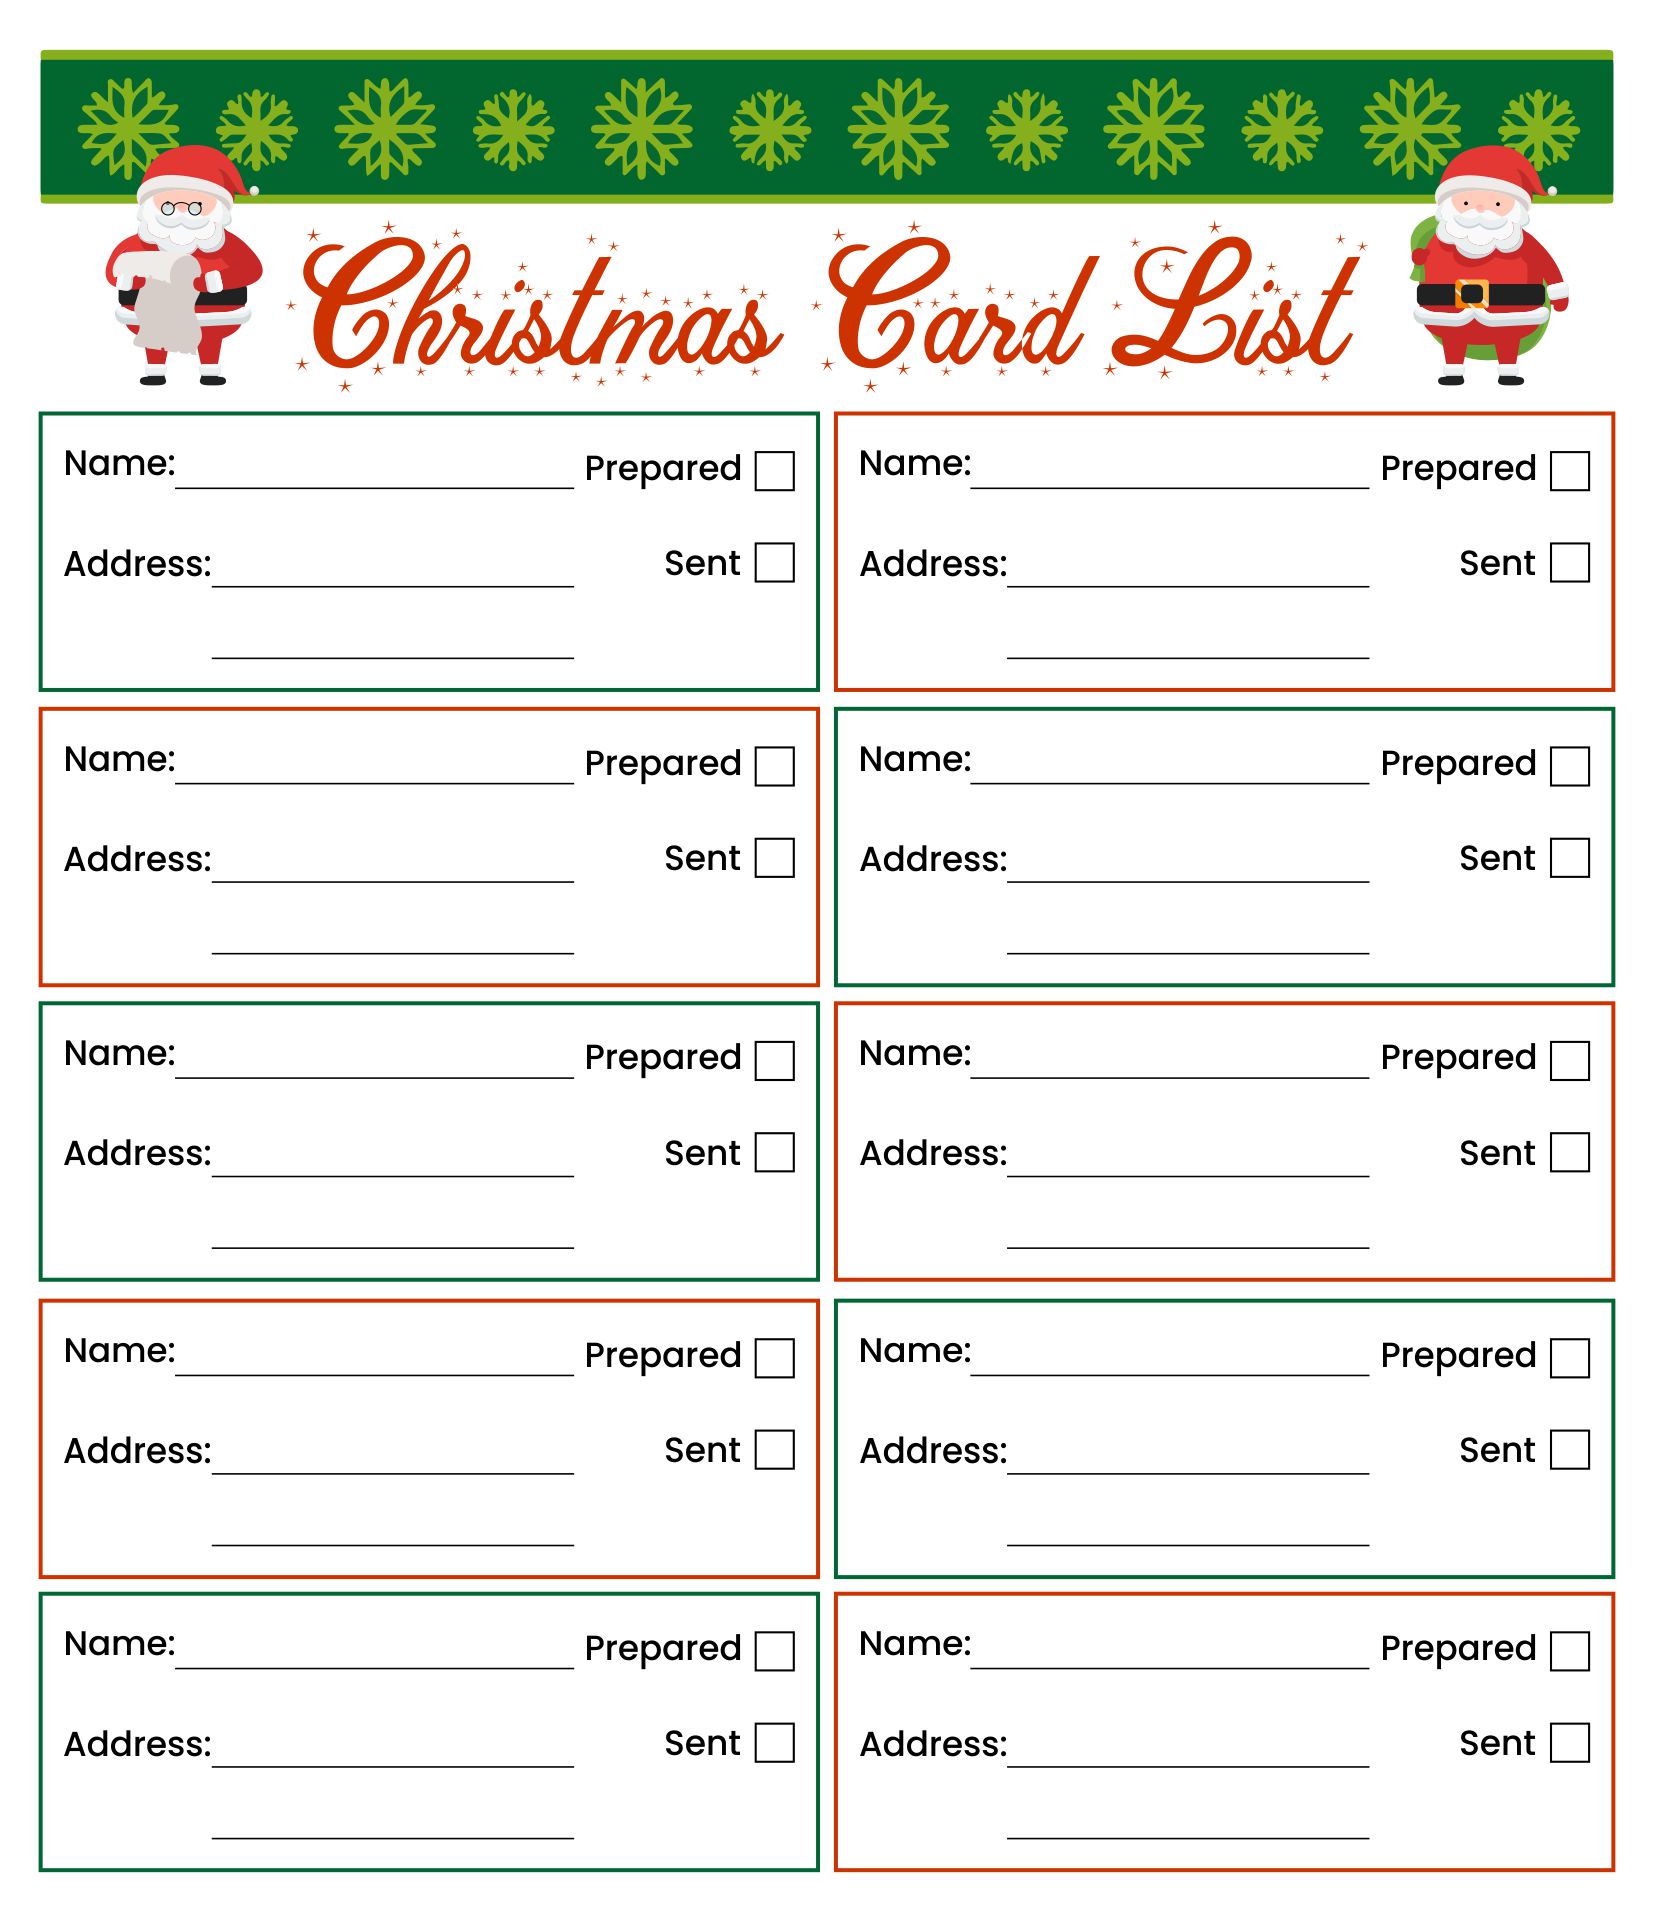 10 Best Printable List Christmas Card Templates PDF For Free At Printablee